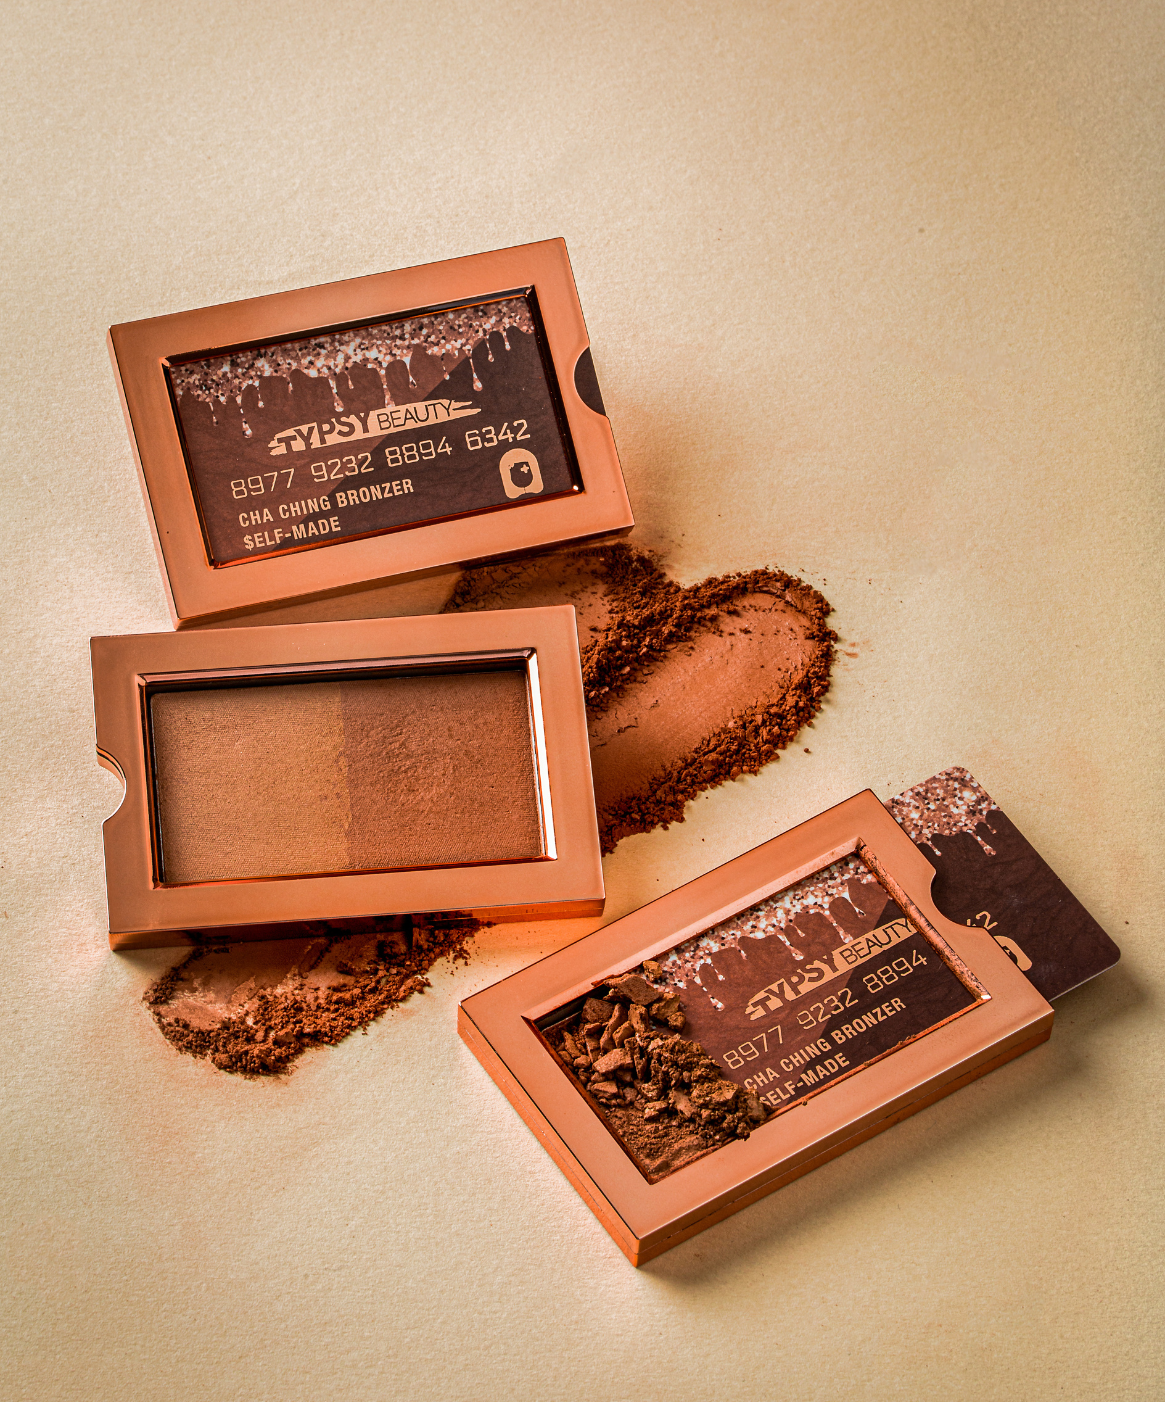 Cha Ching Bronzer (2-in-1) - $elf Made - Typsy Beauty